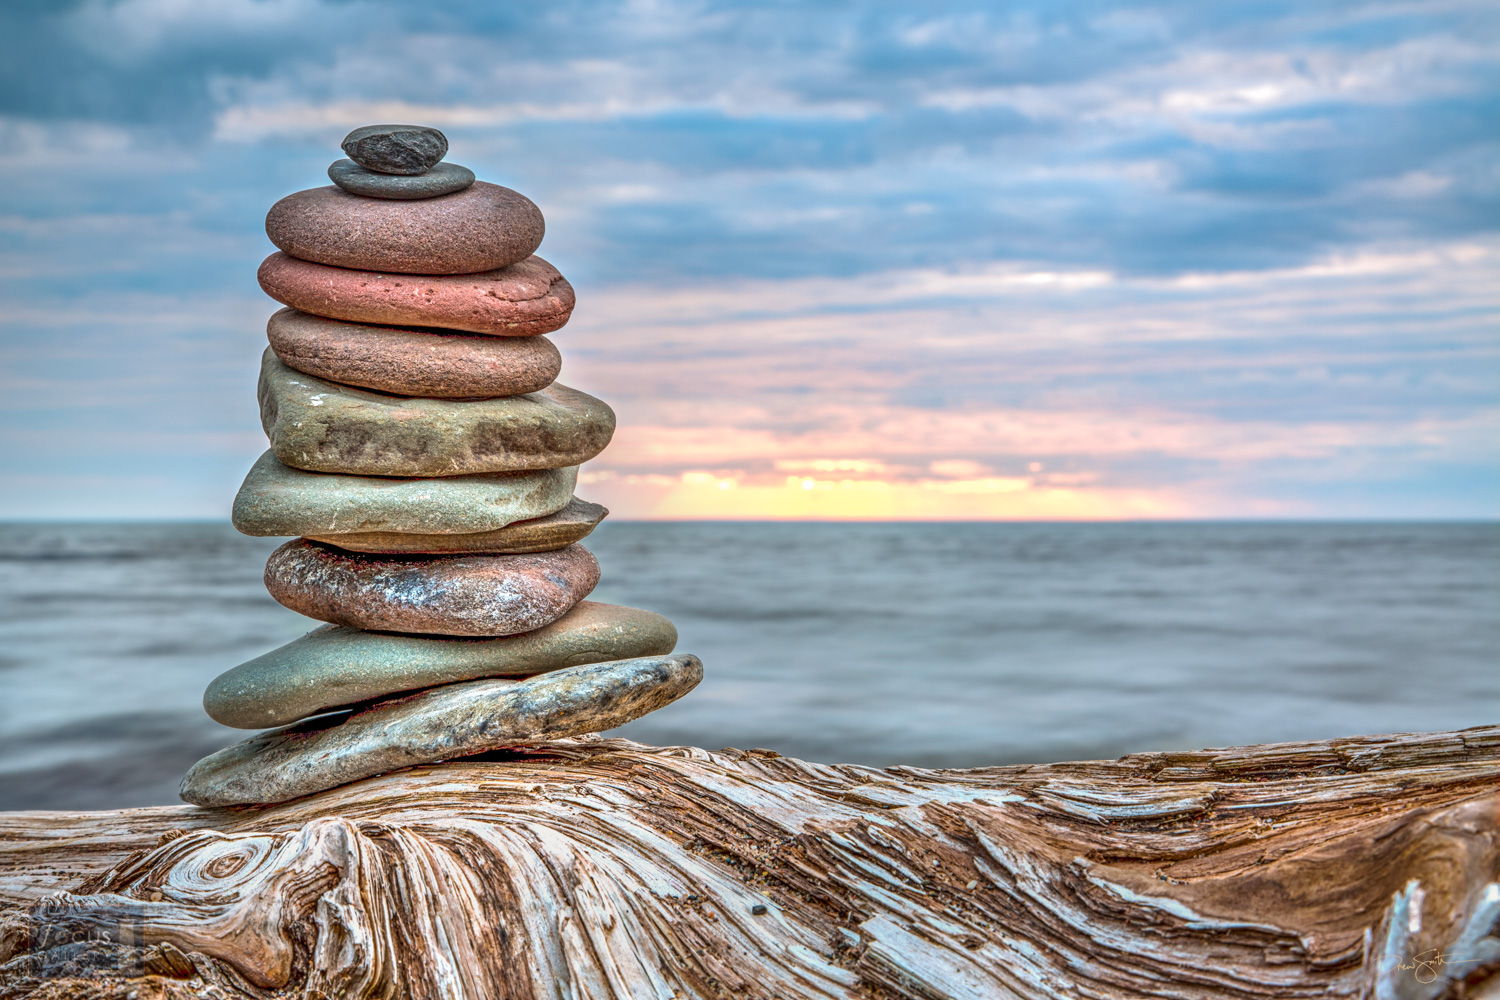 Photograph of a cairn (stack of rocks) on a driftwood log with Lake Superior and the sunset behind.